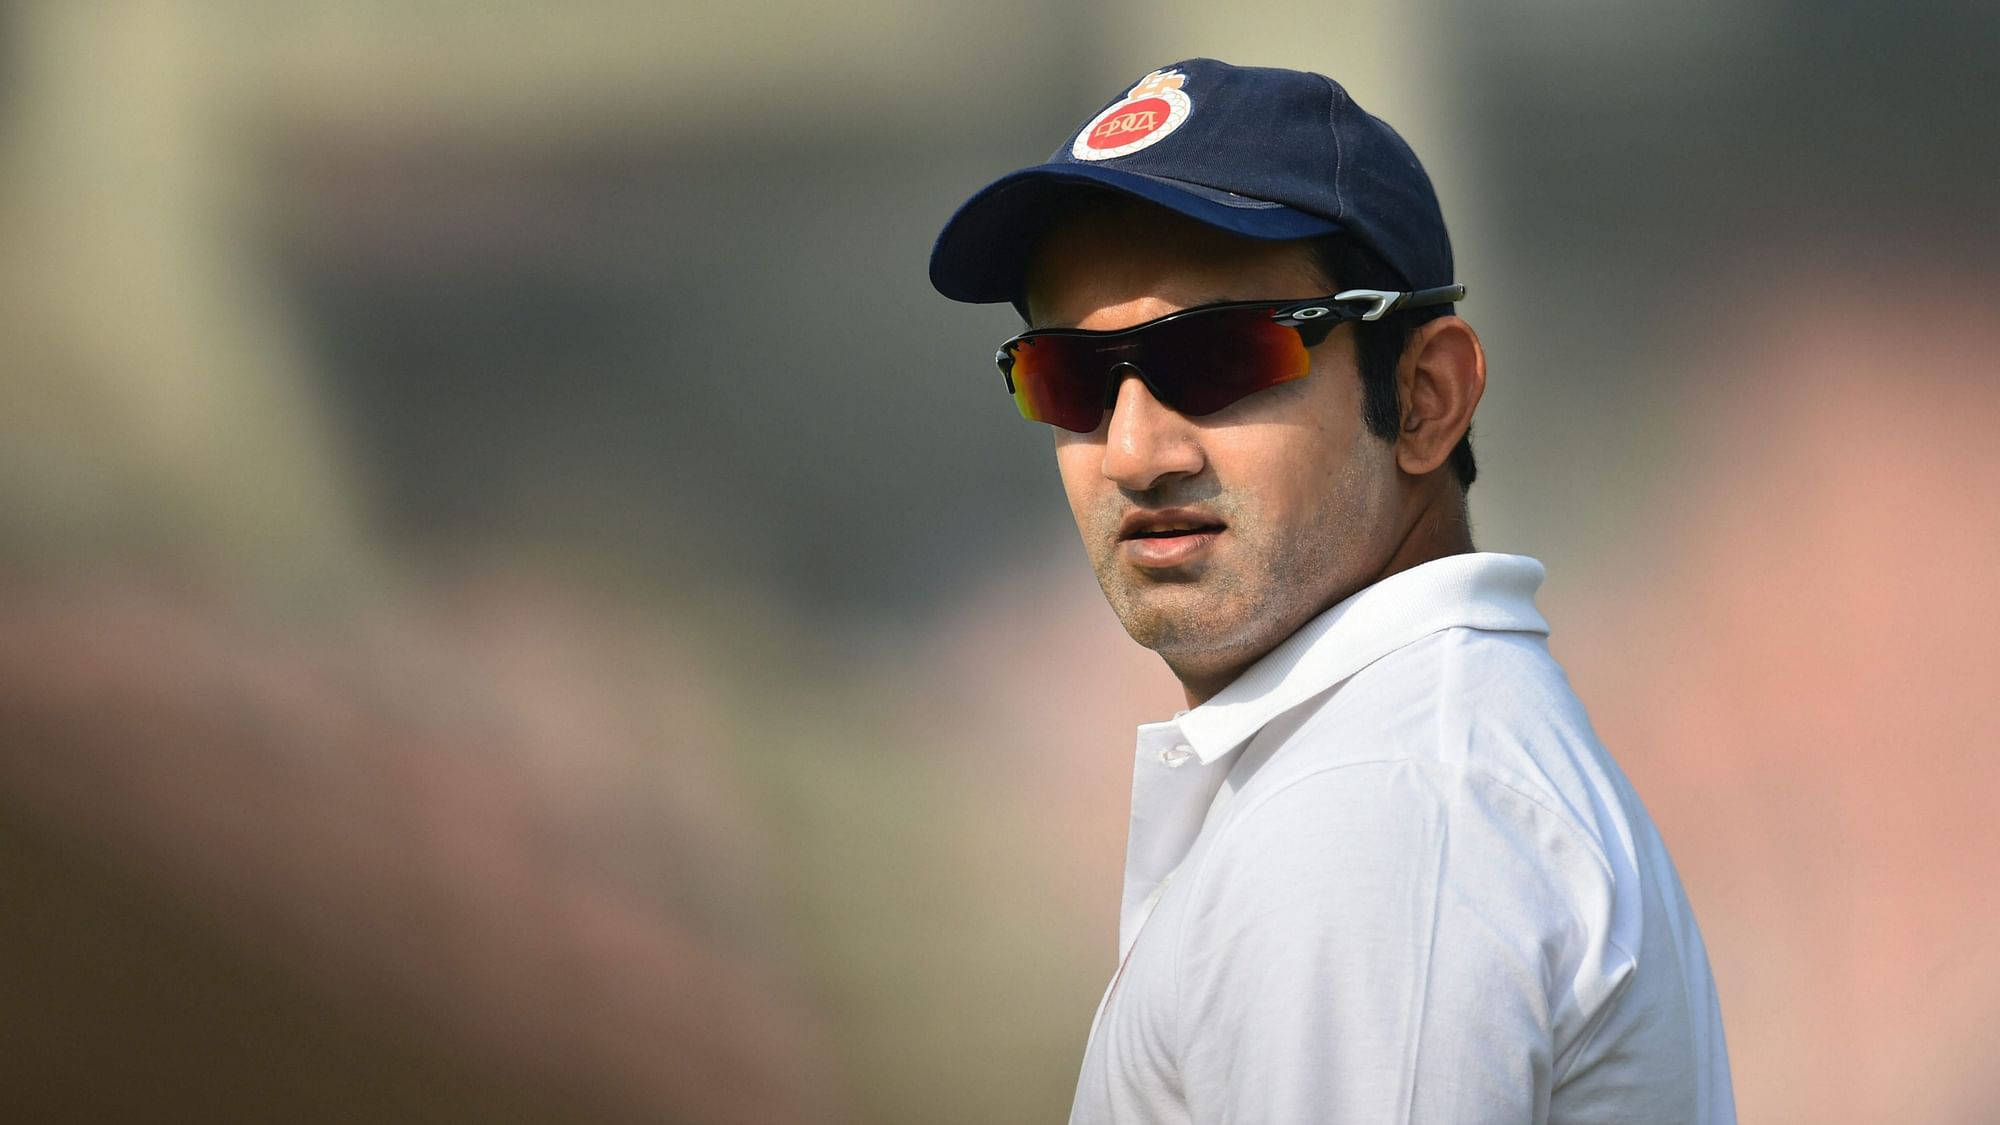 Former opener Gautam Gambhir feels India may have missed out on thinking out-of-the-box while picking their World Cup squad.